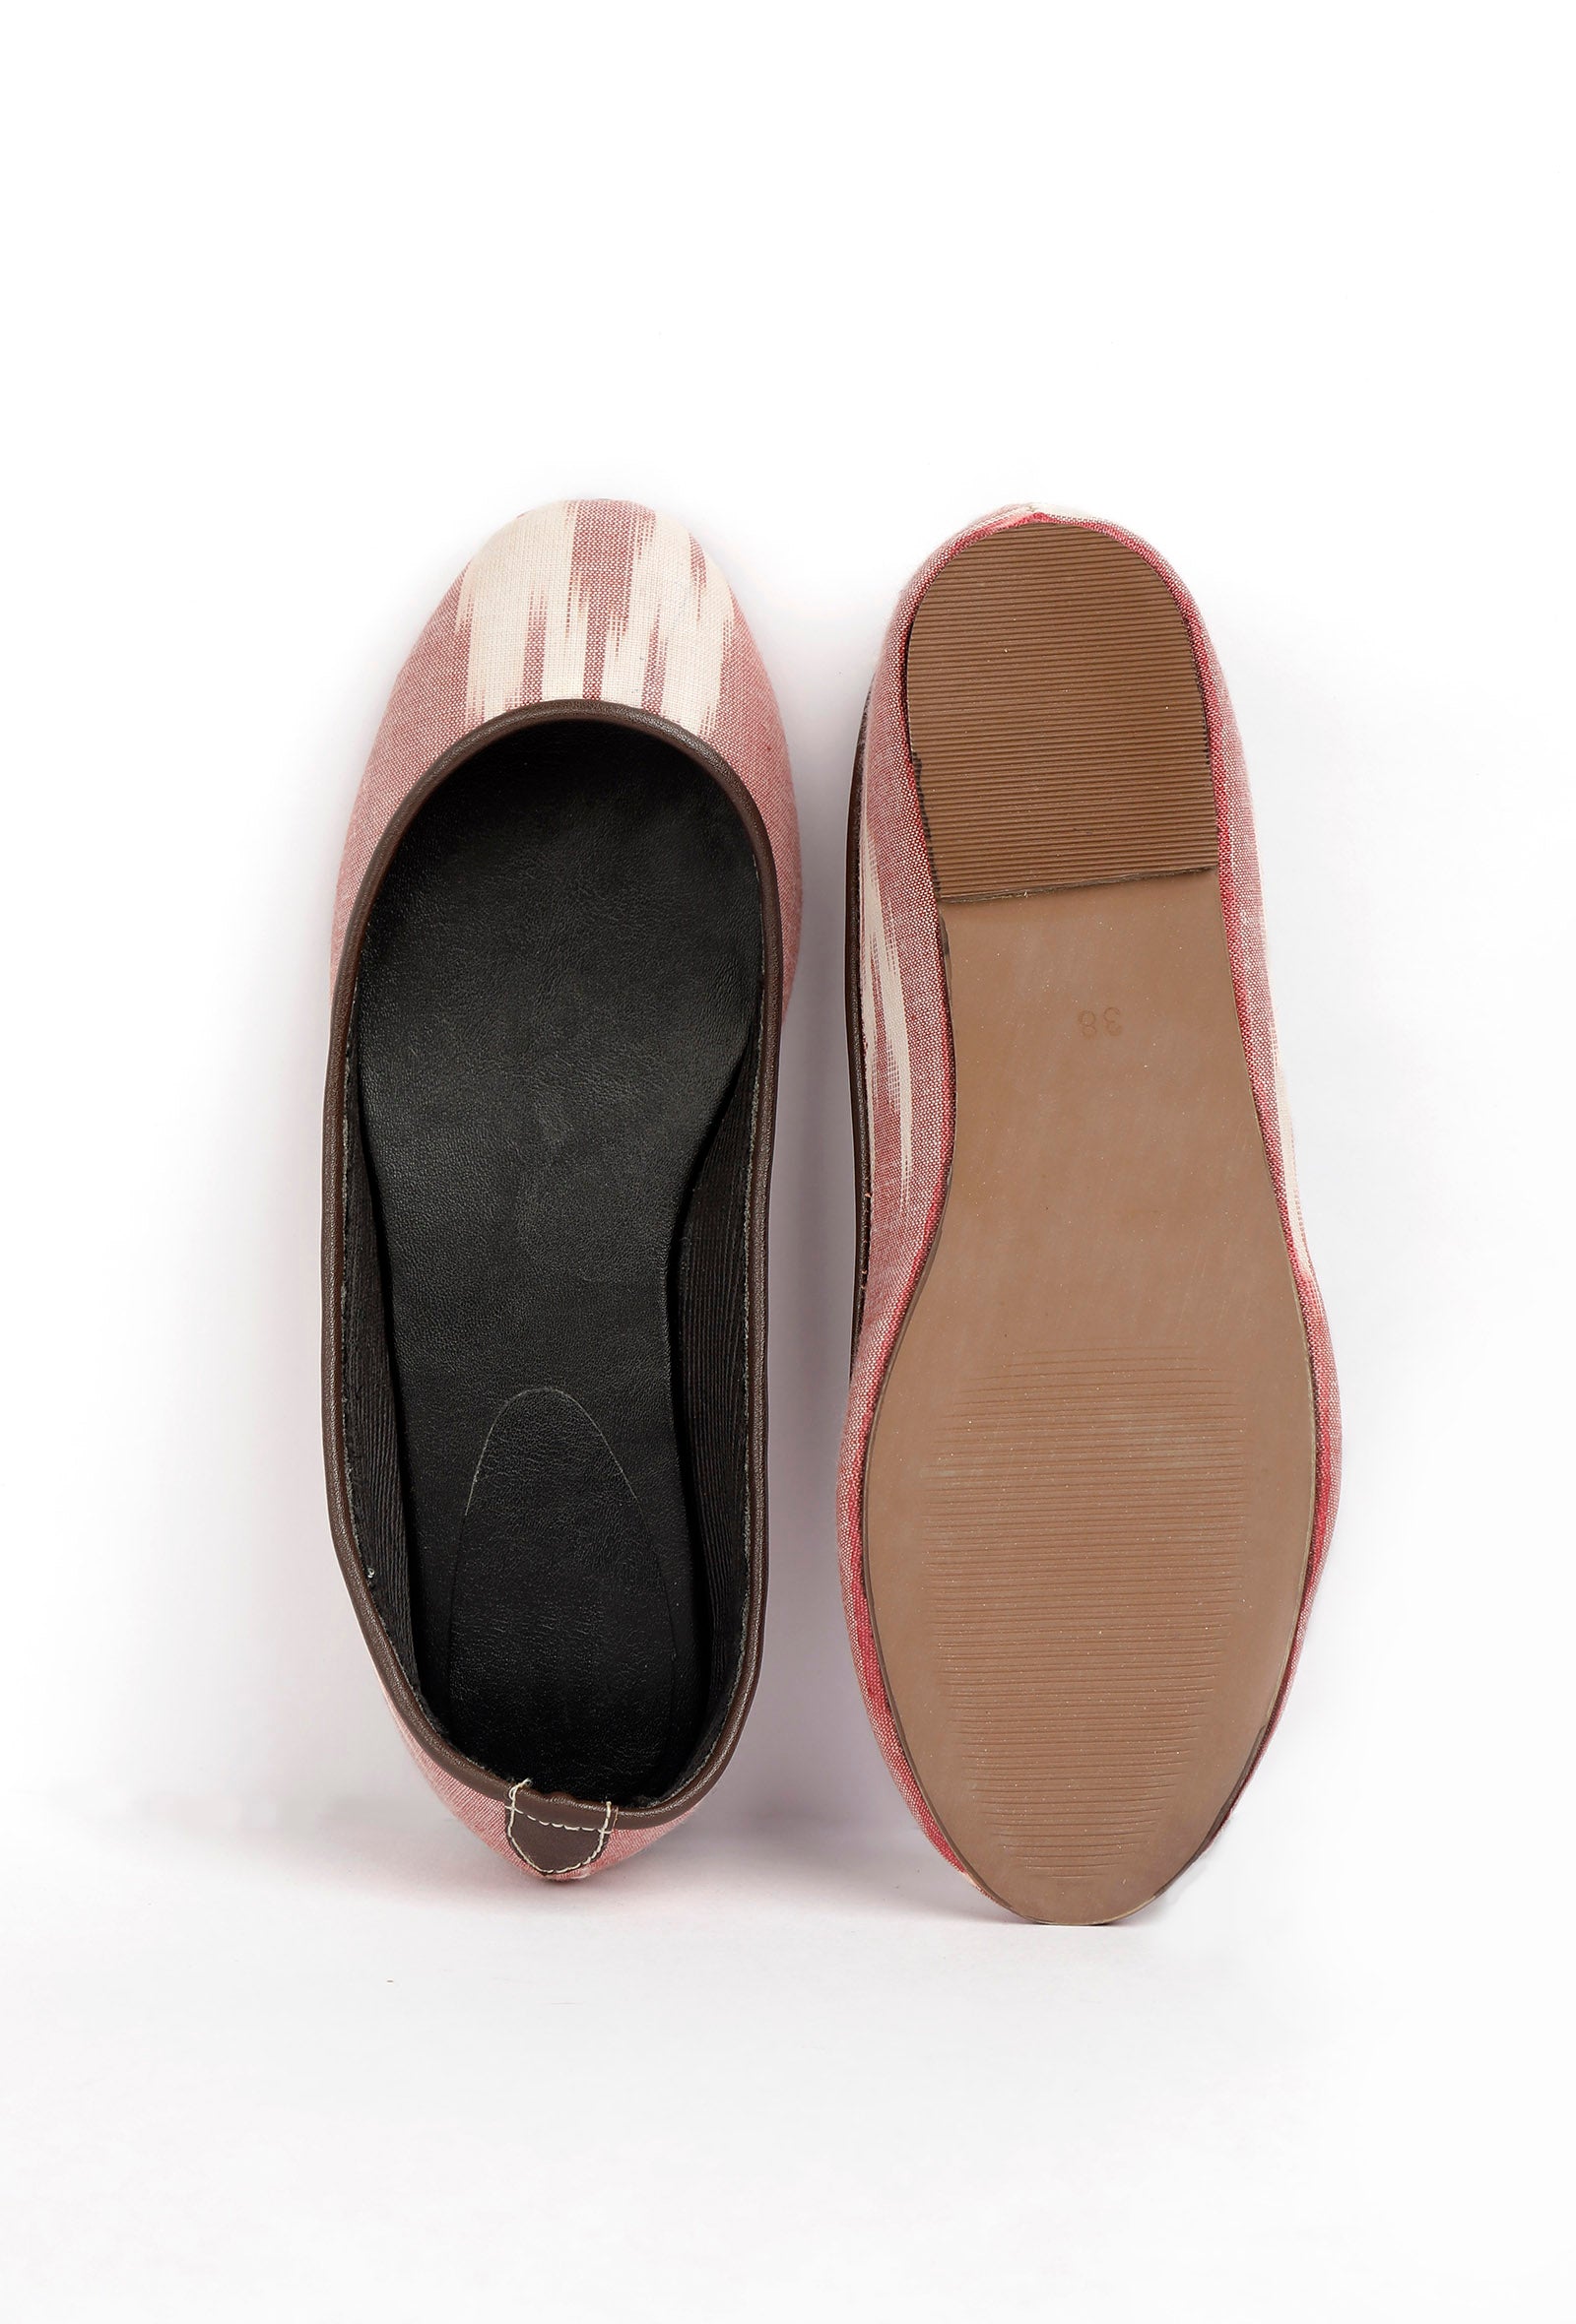 Pink and White Ikat Cruelty Free Leather Flat Ballerinas